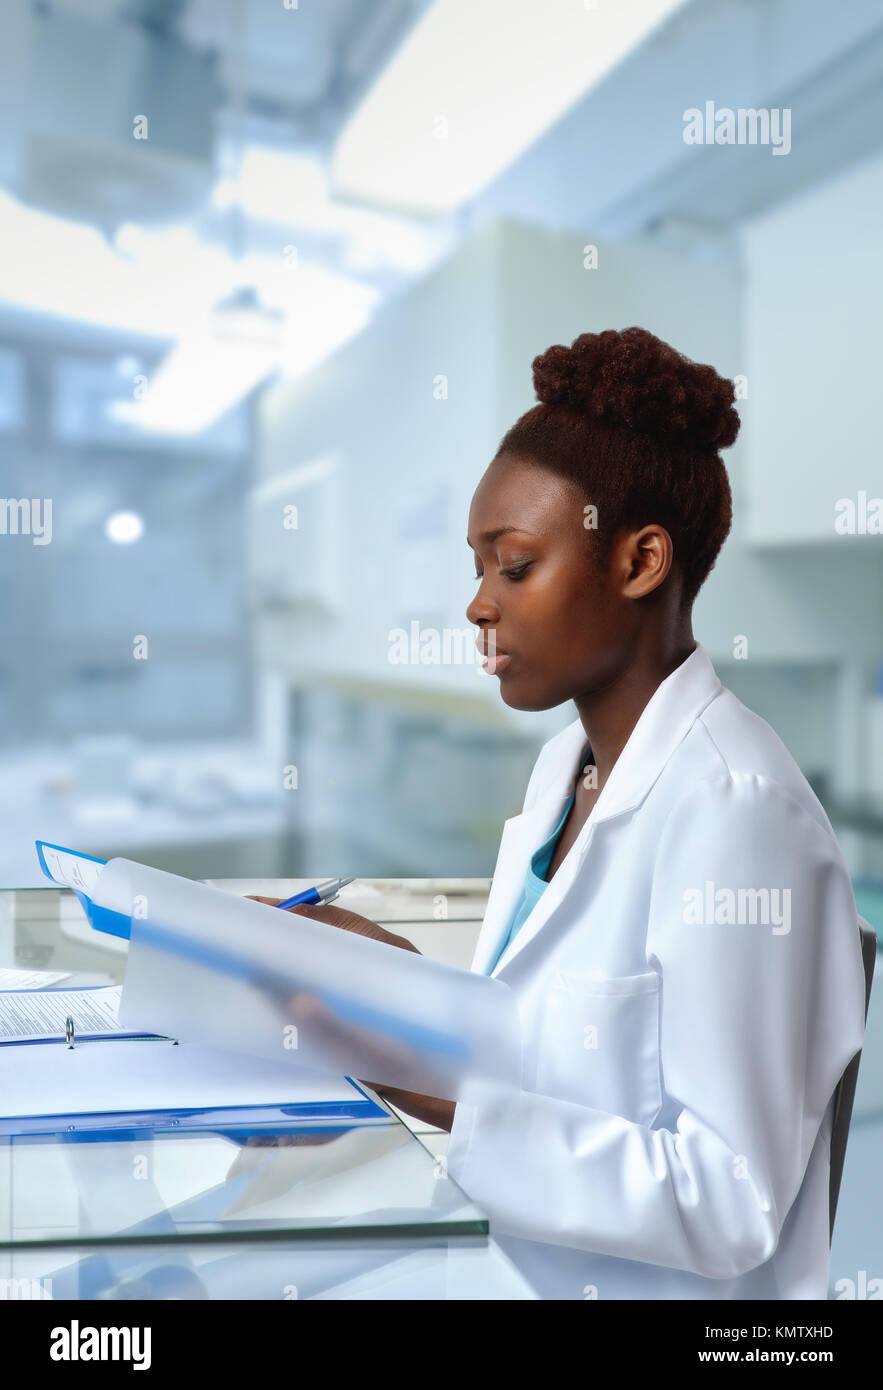 African-american biologist checks sequencing results in scientific lab or research facility. Focus on the face and eyelashes. Stock Photo